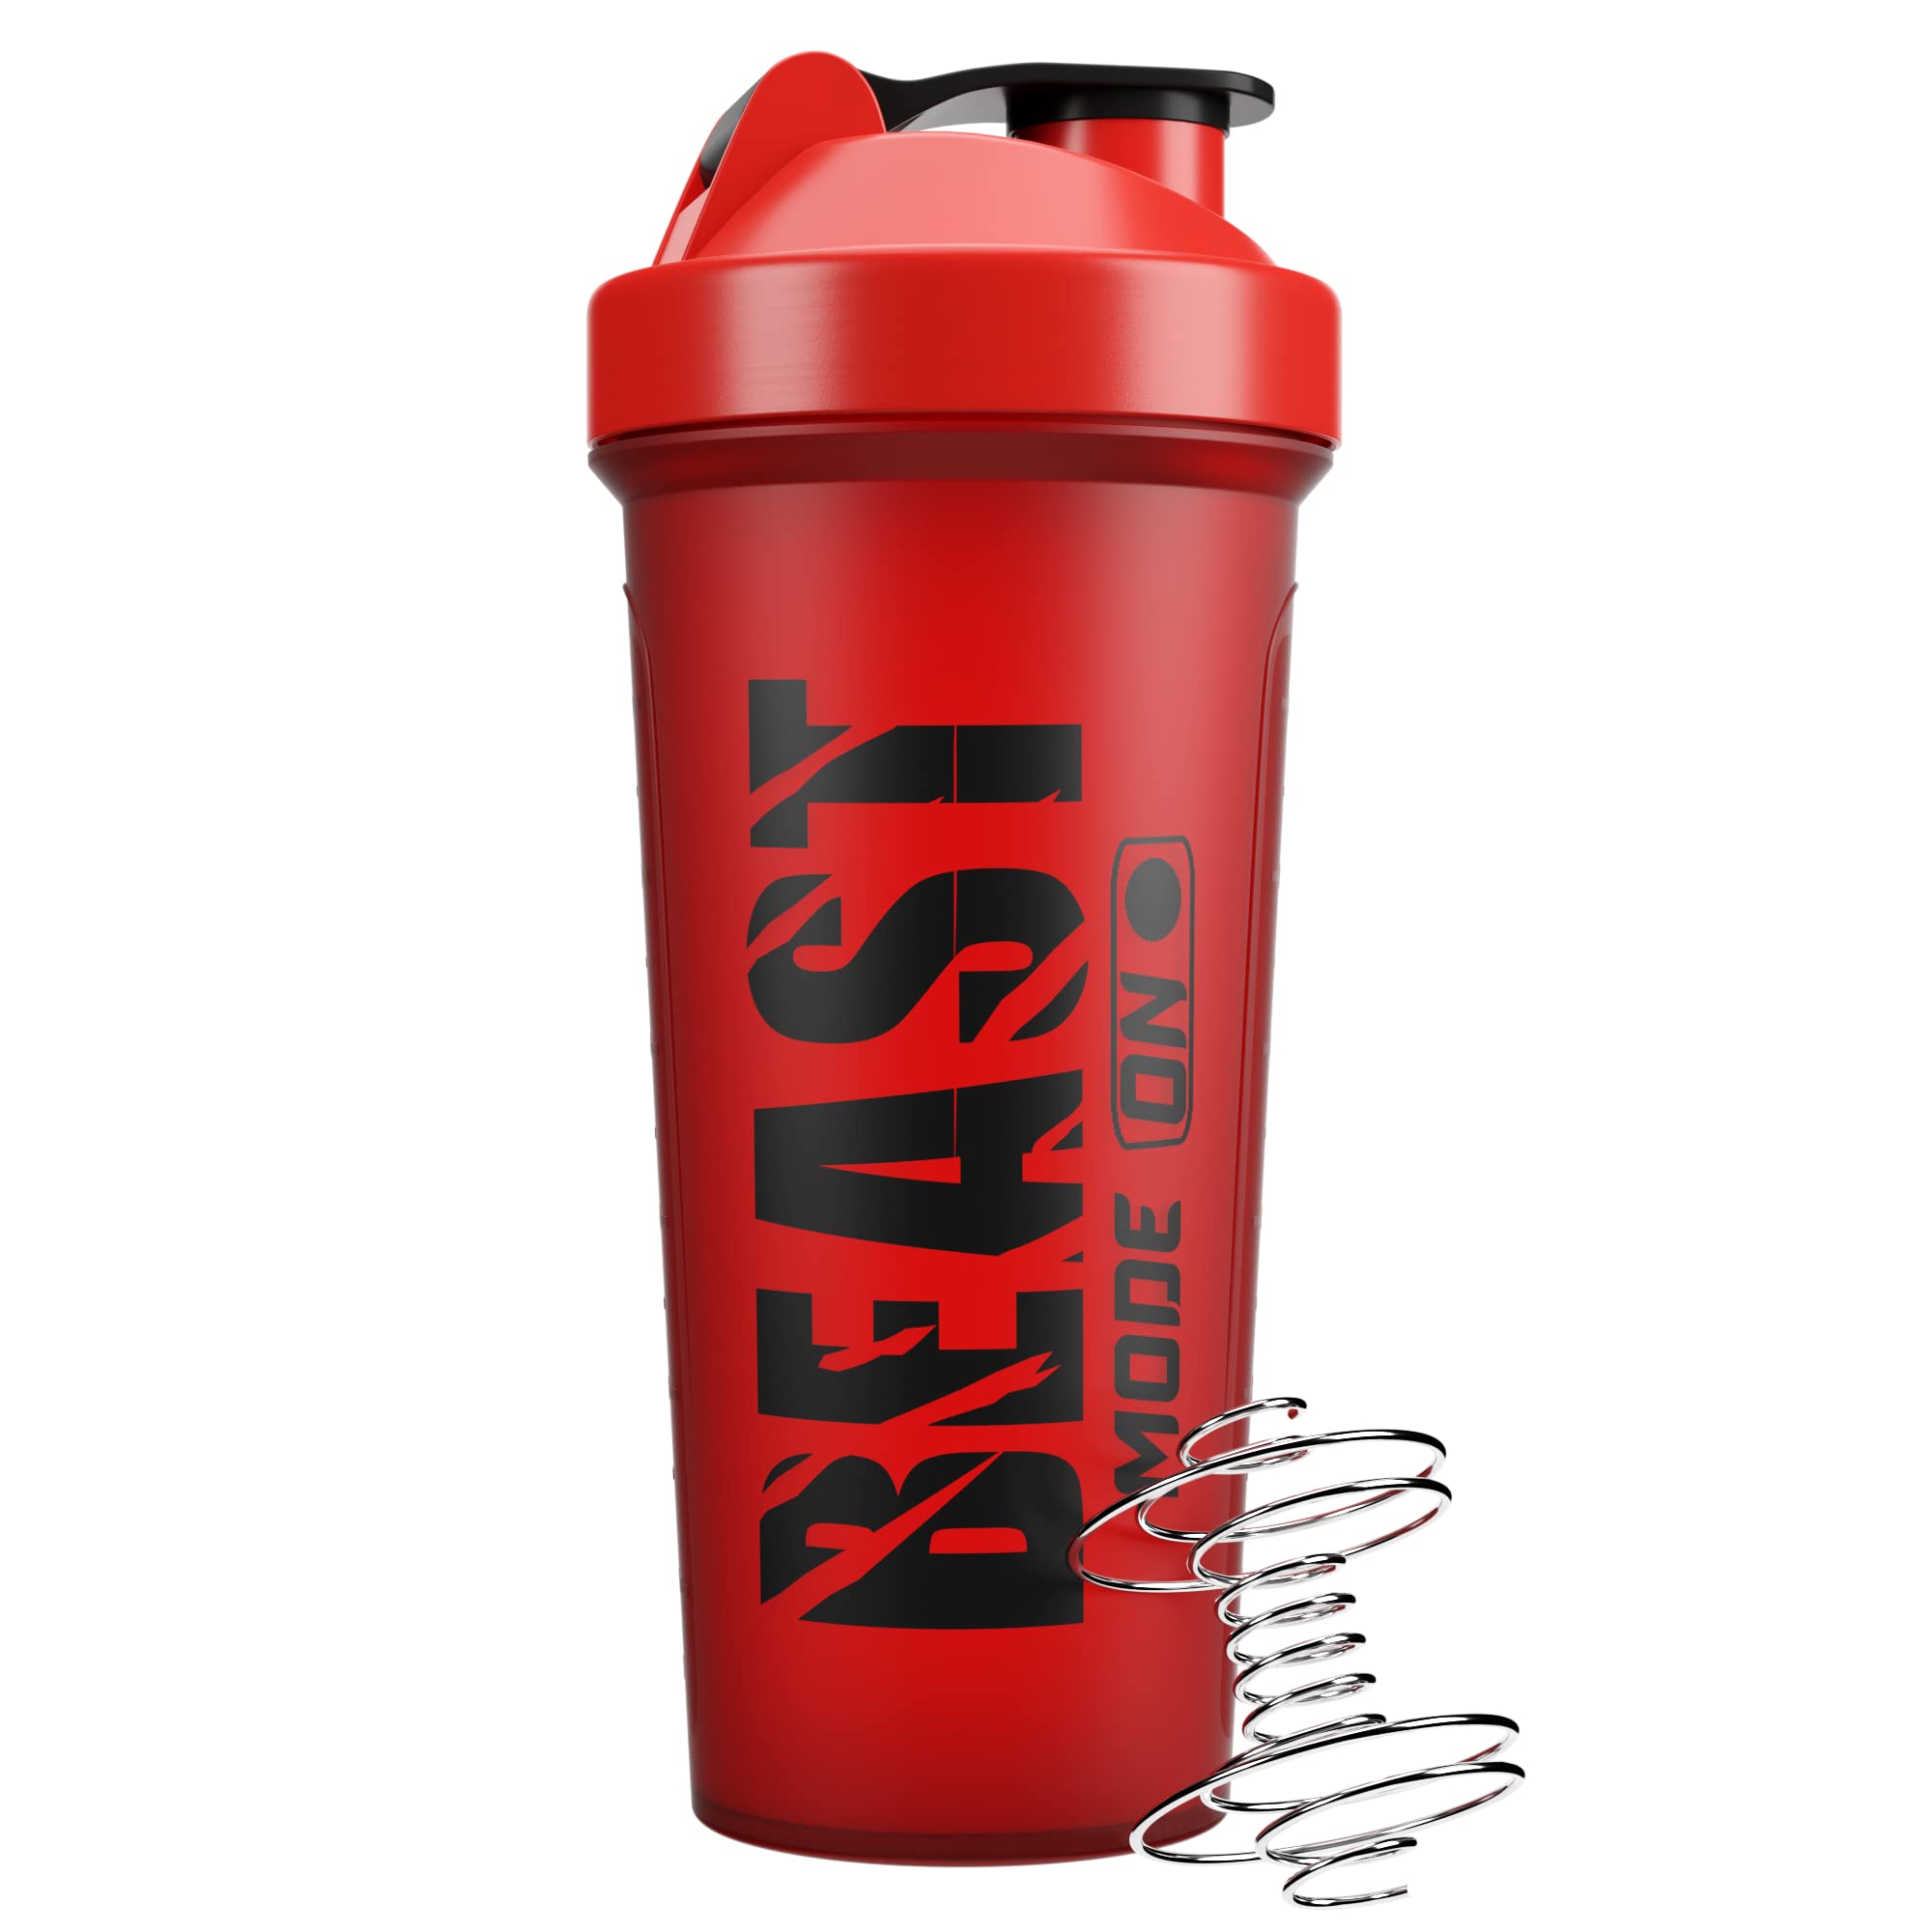 JEELA SPORTS 5 PACK Protein Shaker Bottles for Protein Mixes -24 OZ- Dishwasher Safe Shaker Cups for Protein Shakes - Shaker Cup for Blender Protein Shaker Bottle for Shakes Protein Shake Blender